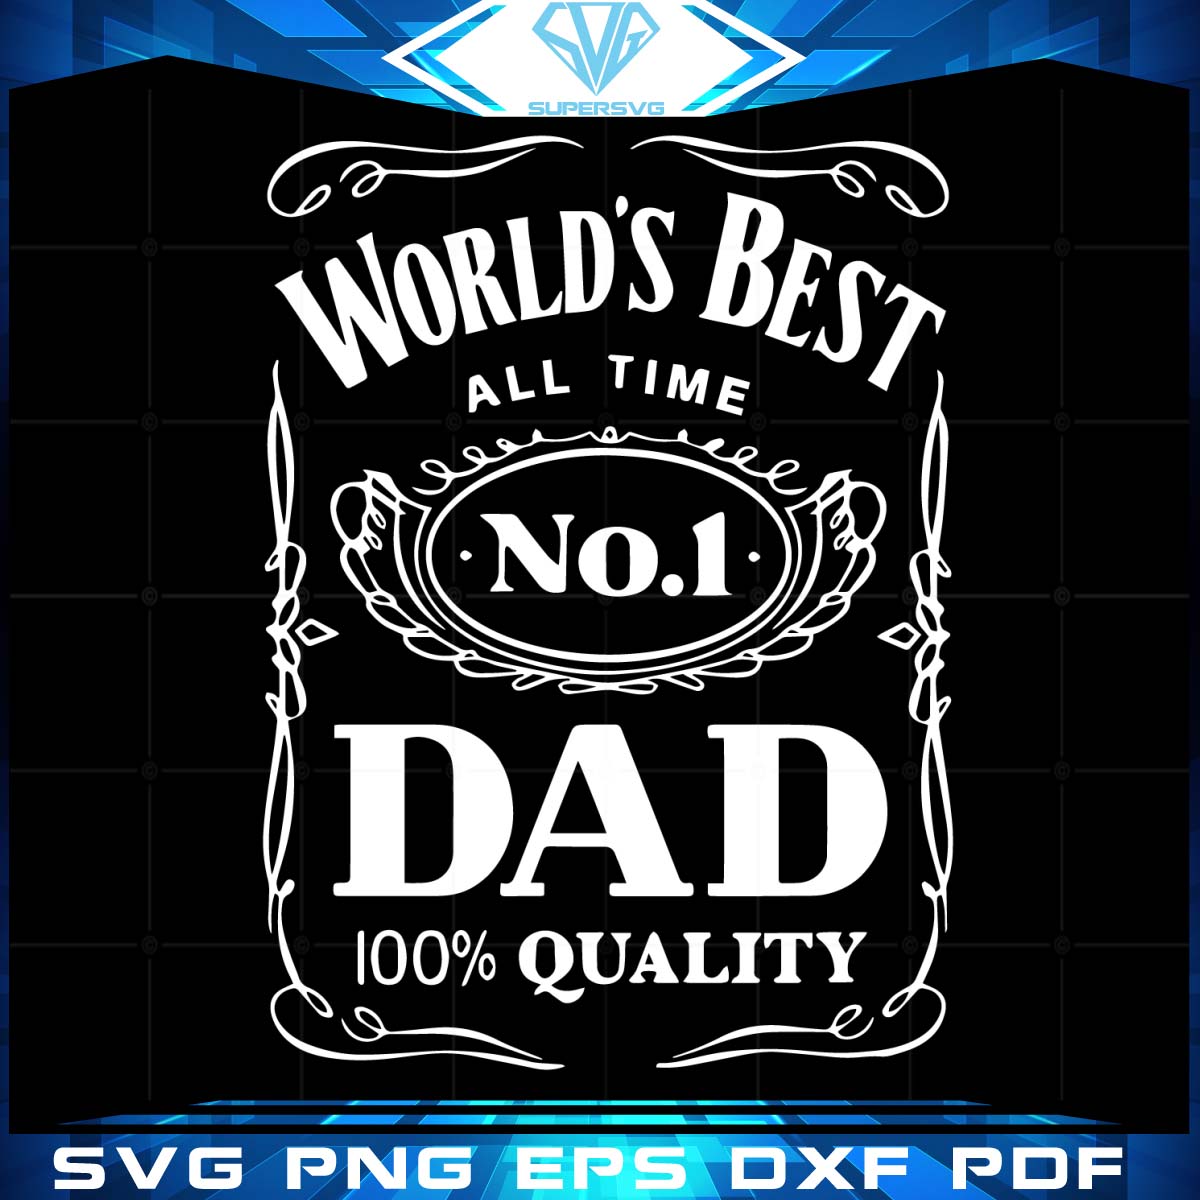 Worlds Best All Time No.1 Dad 100 Quality Svg